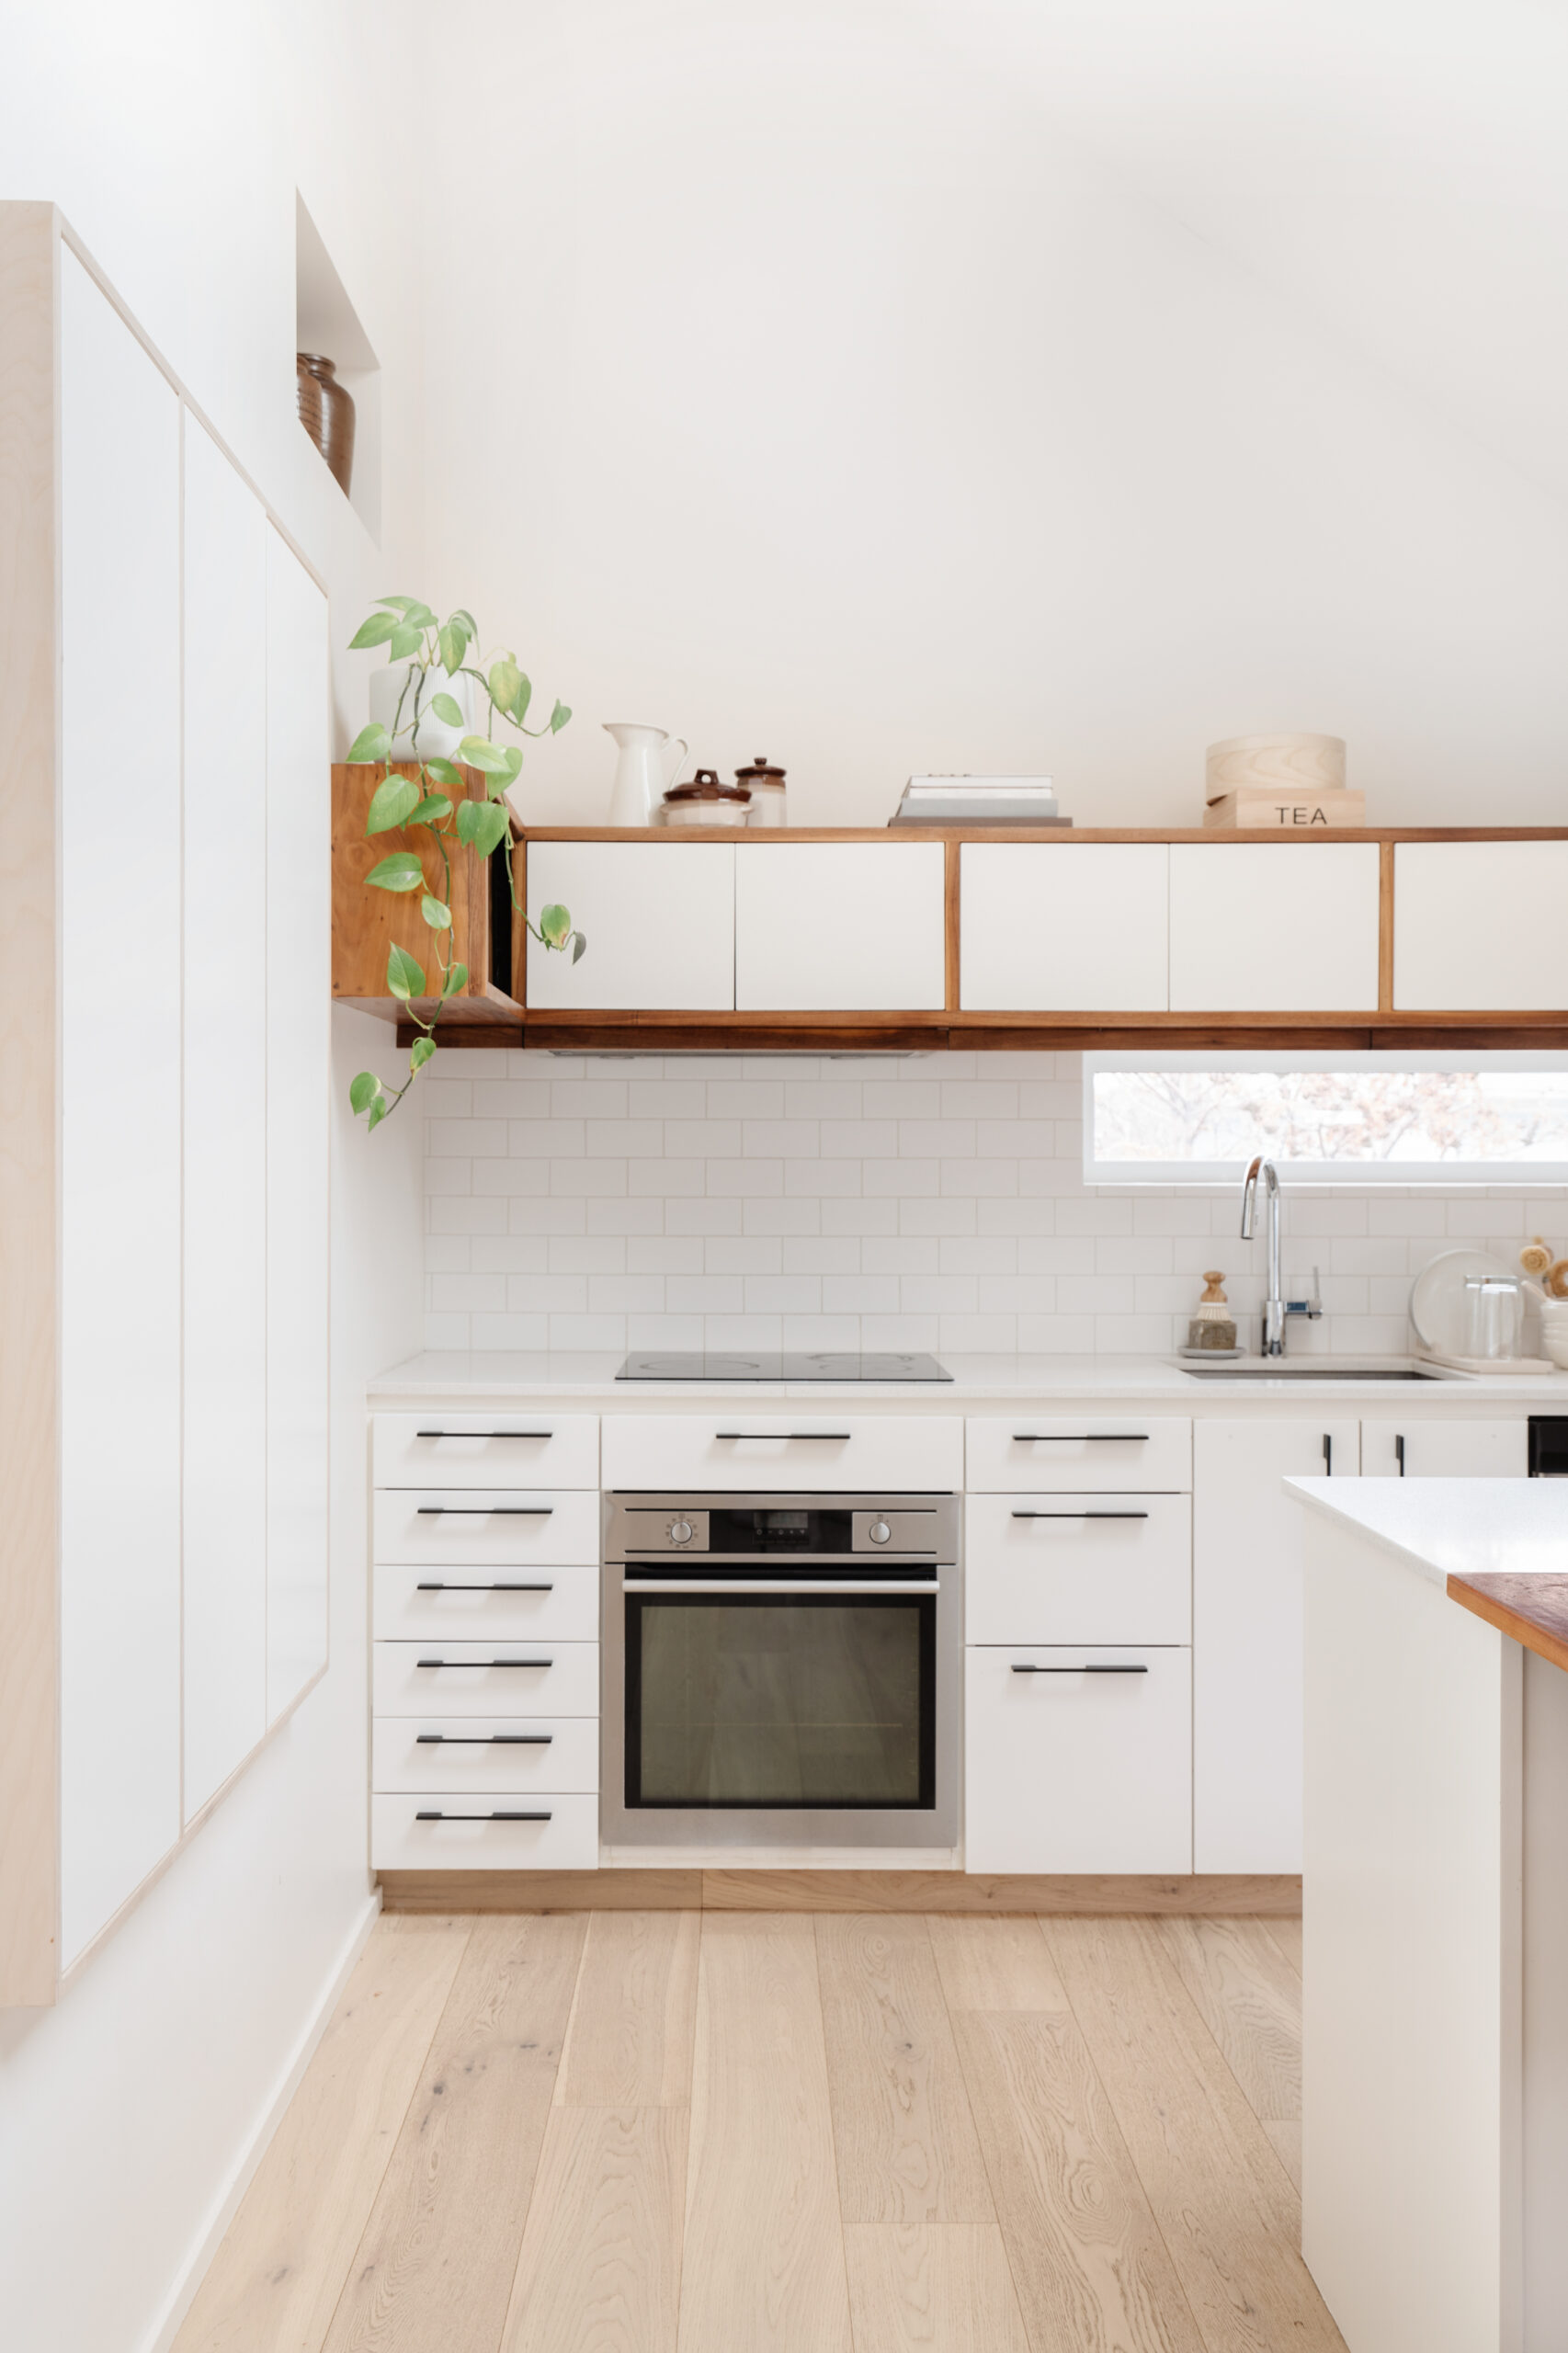 How to Organize your Kitchen with these 10 Simple Tips